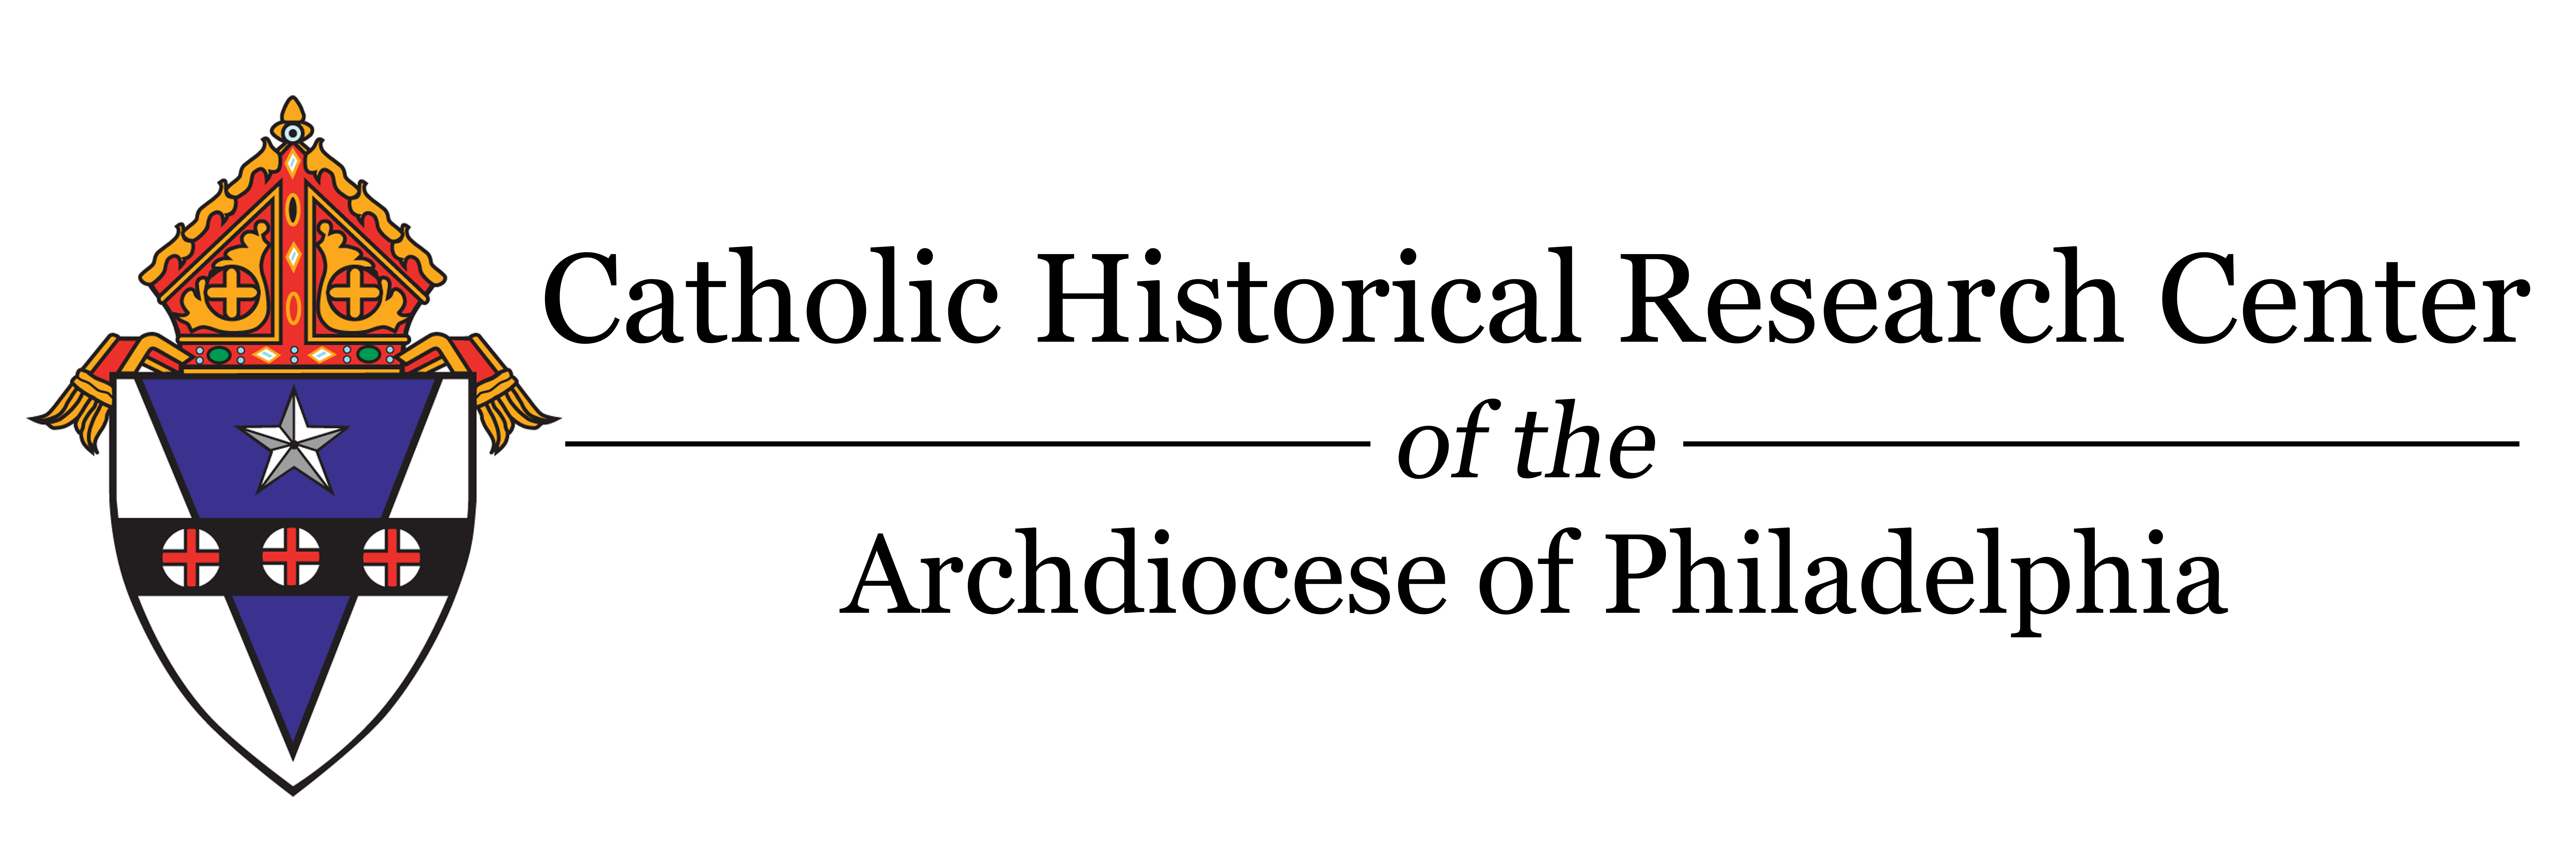 Catholic Historical Research Center of the Archdiocese of Philadelphia